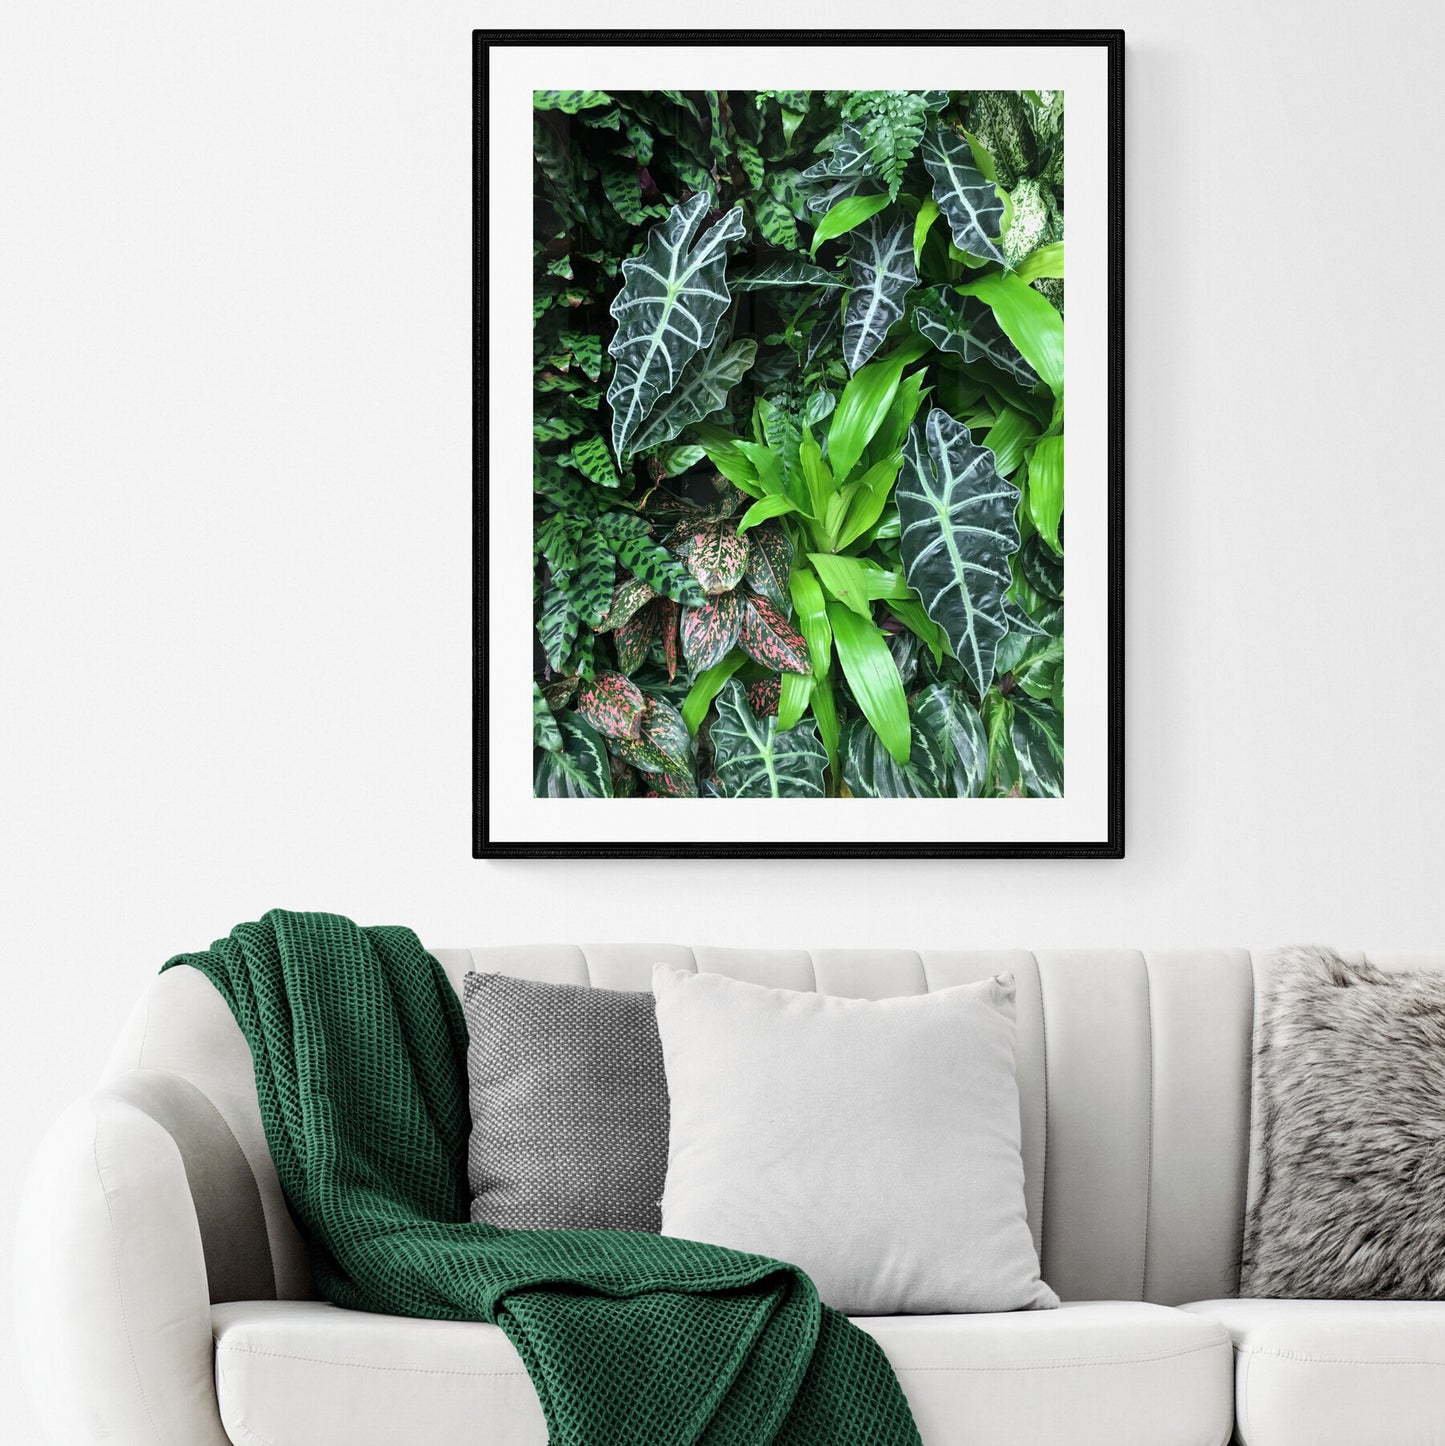 "Bring the Outdoors Inside", Plant Wall Photography, Tropical Greenery, Bohemian Style